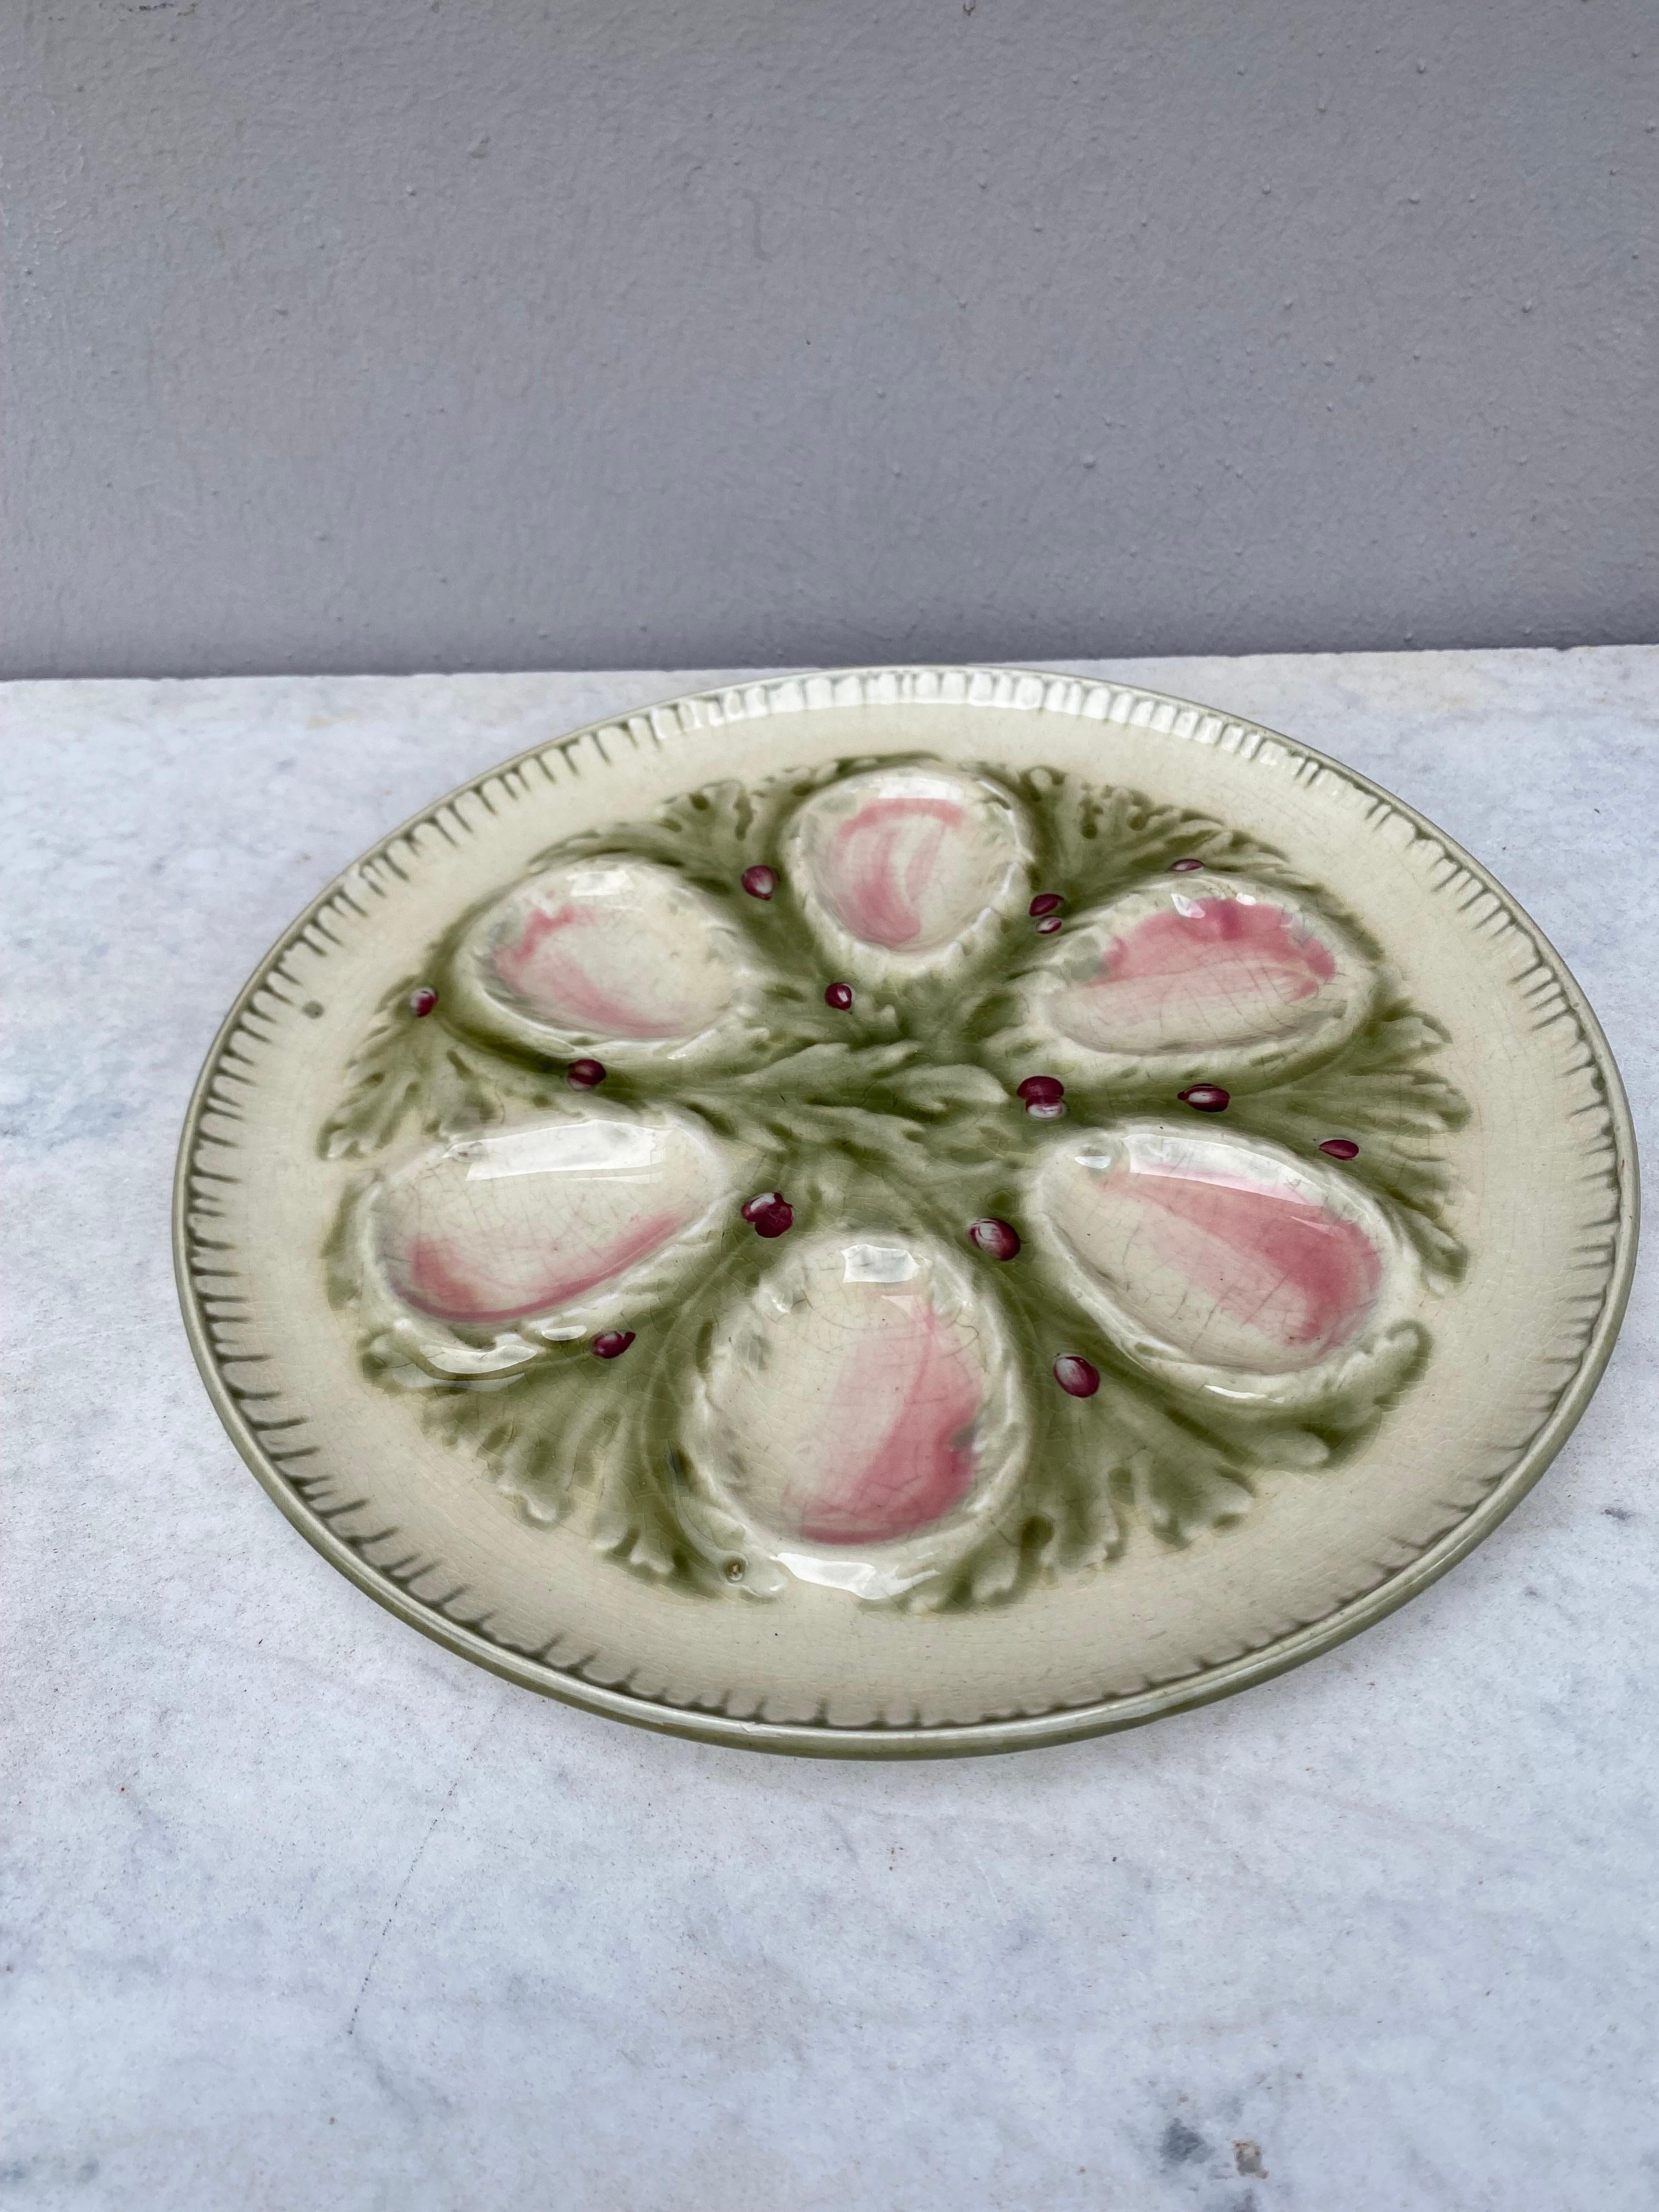 French Majolica oyster plate signed Hippolyte Boulenger Choisy-le-Roi. The six pink wells are surrounded by green seaweeds.